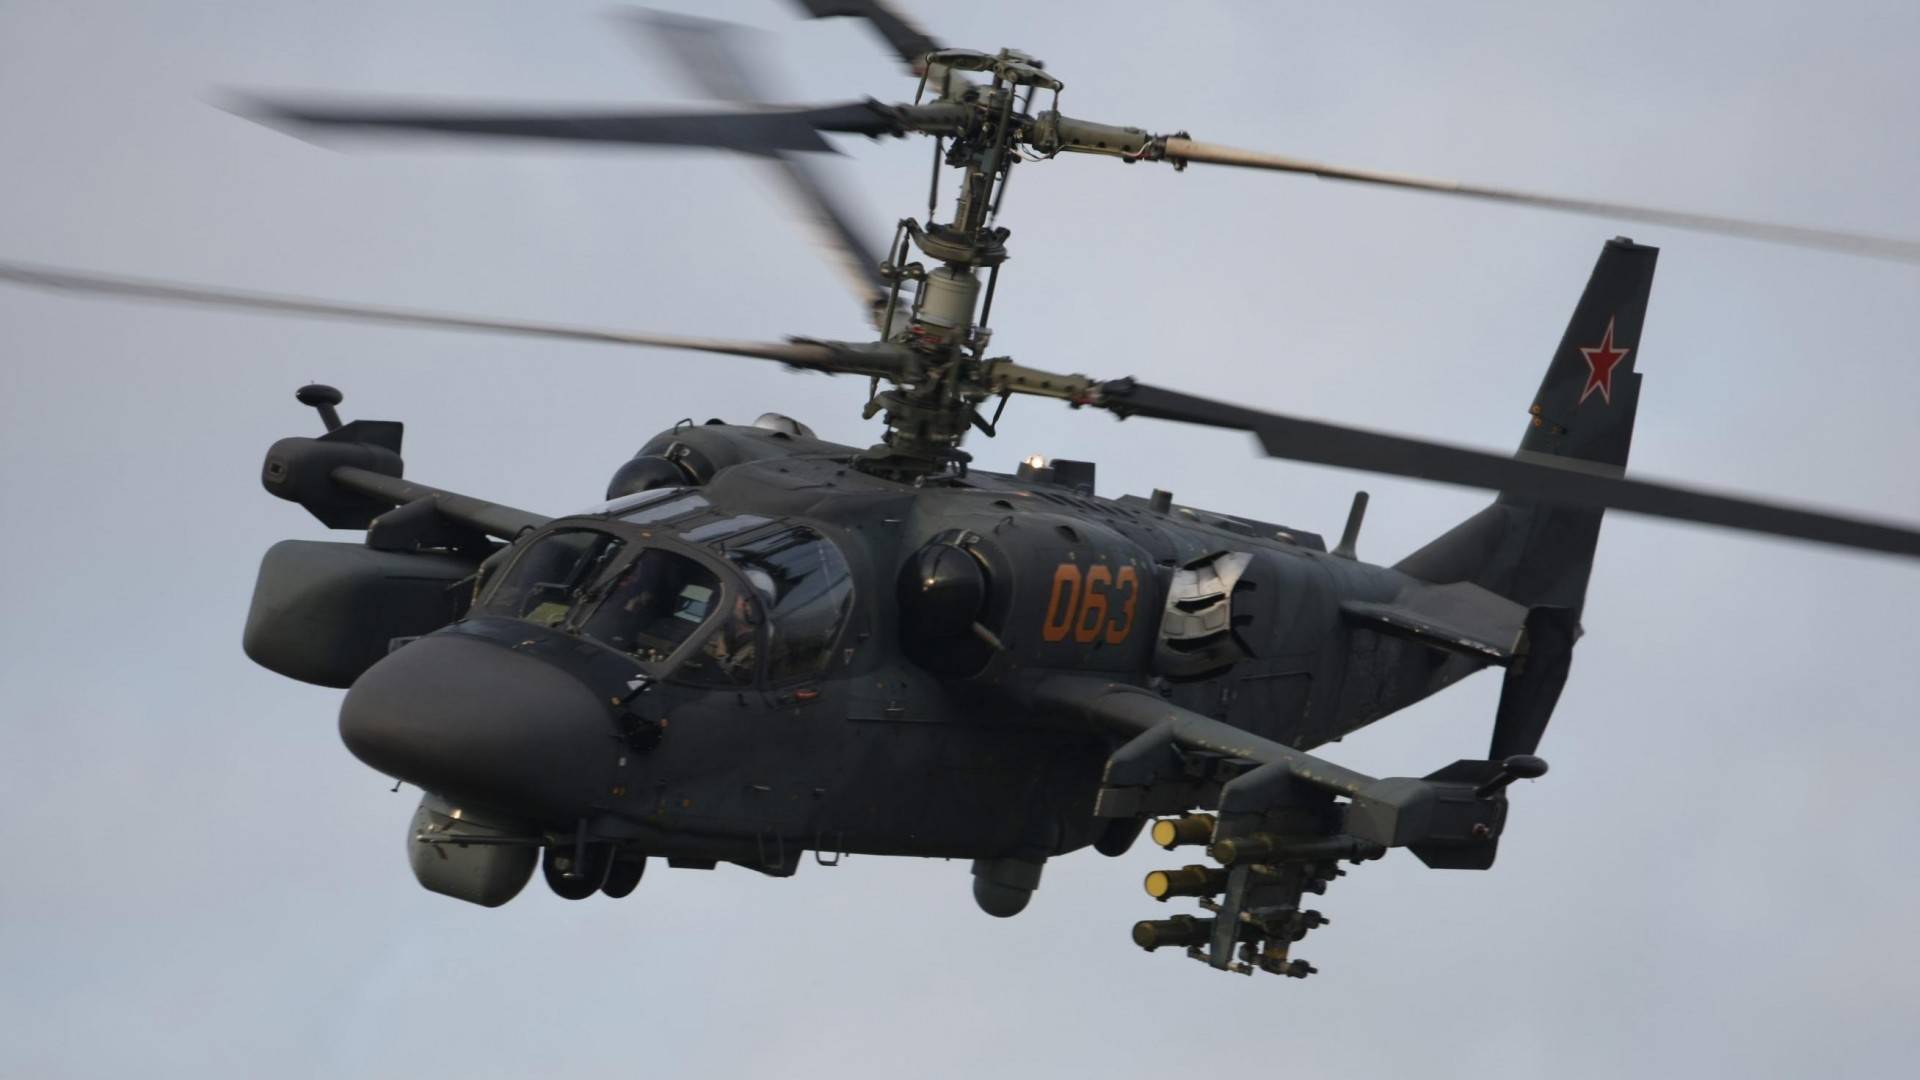 Wallpapers helicopter military black on the desktop